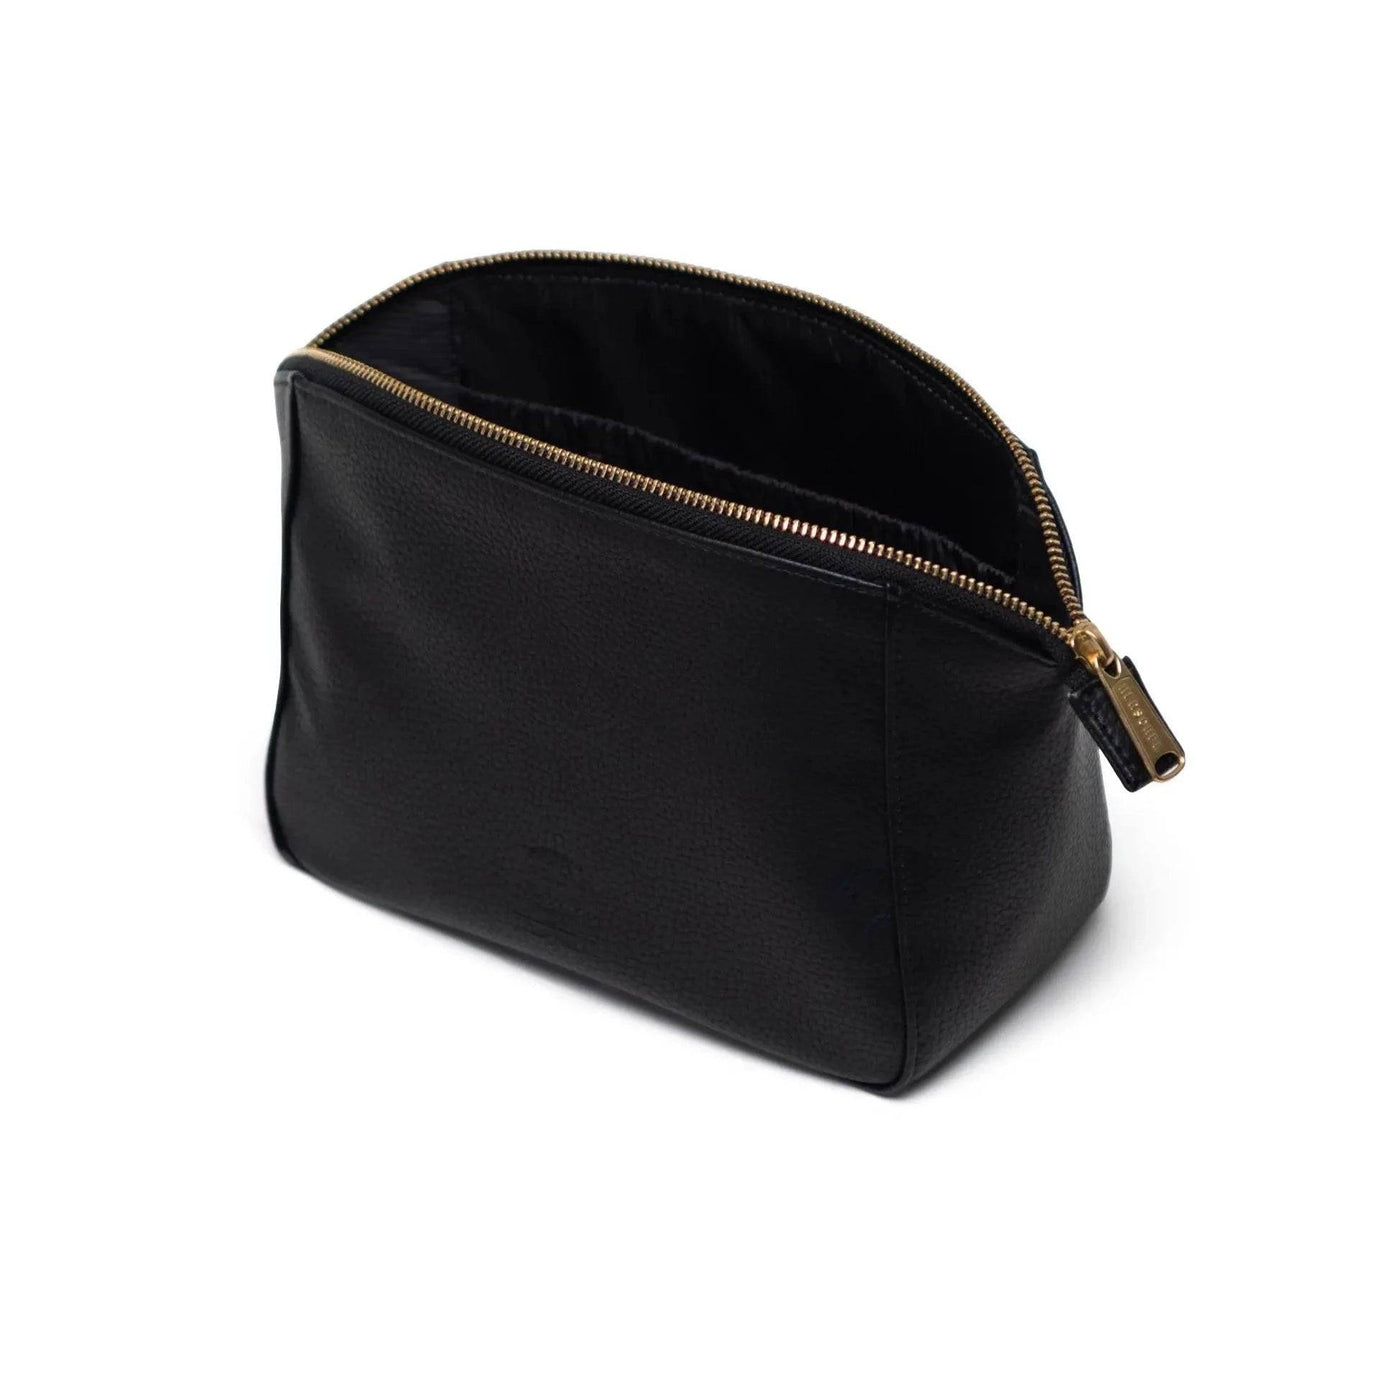 Milan Toiletry Bag | Vegan Leather (SALE) - The Local Space